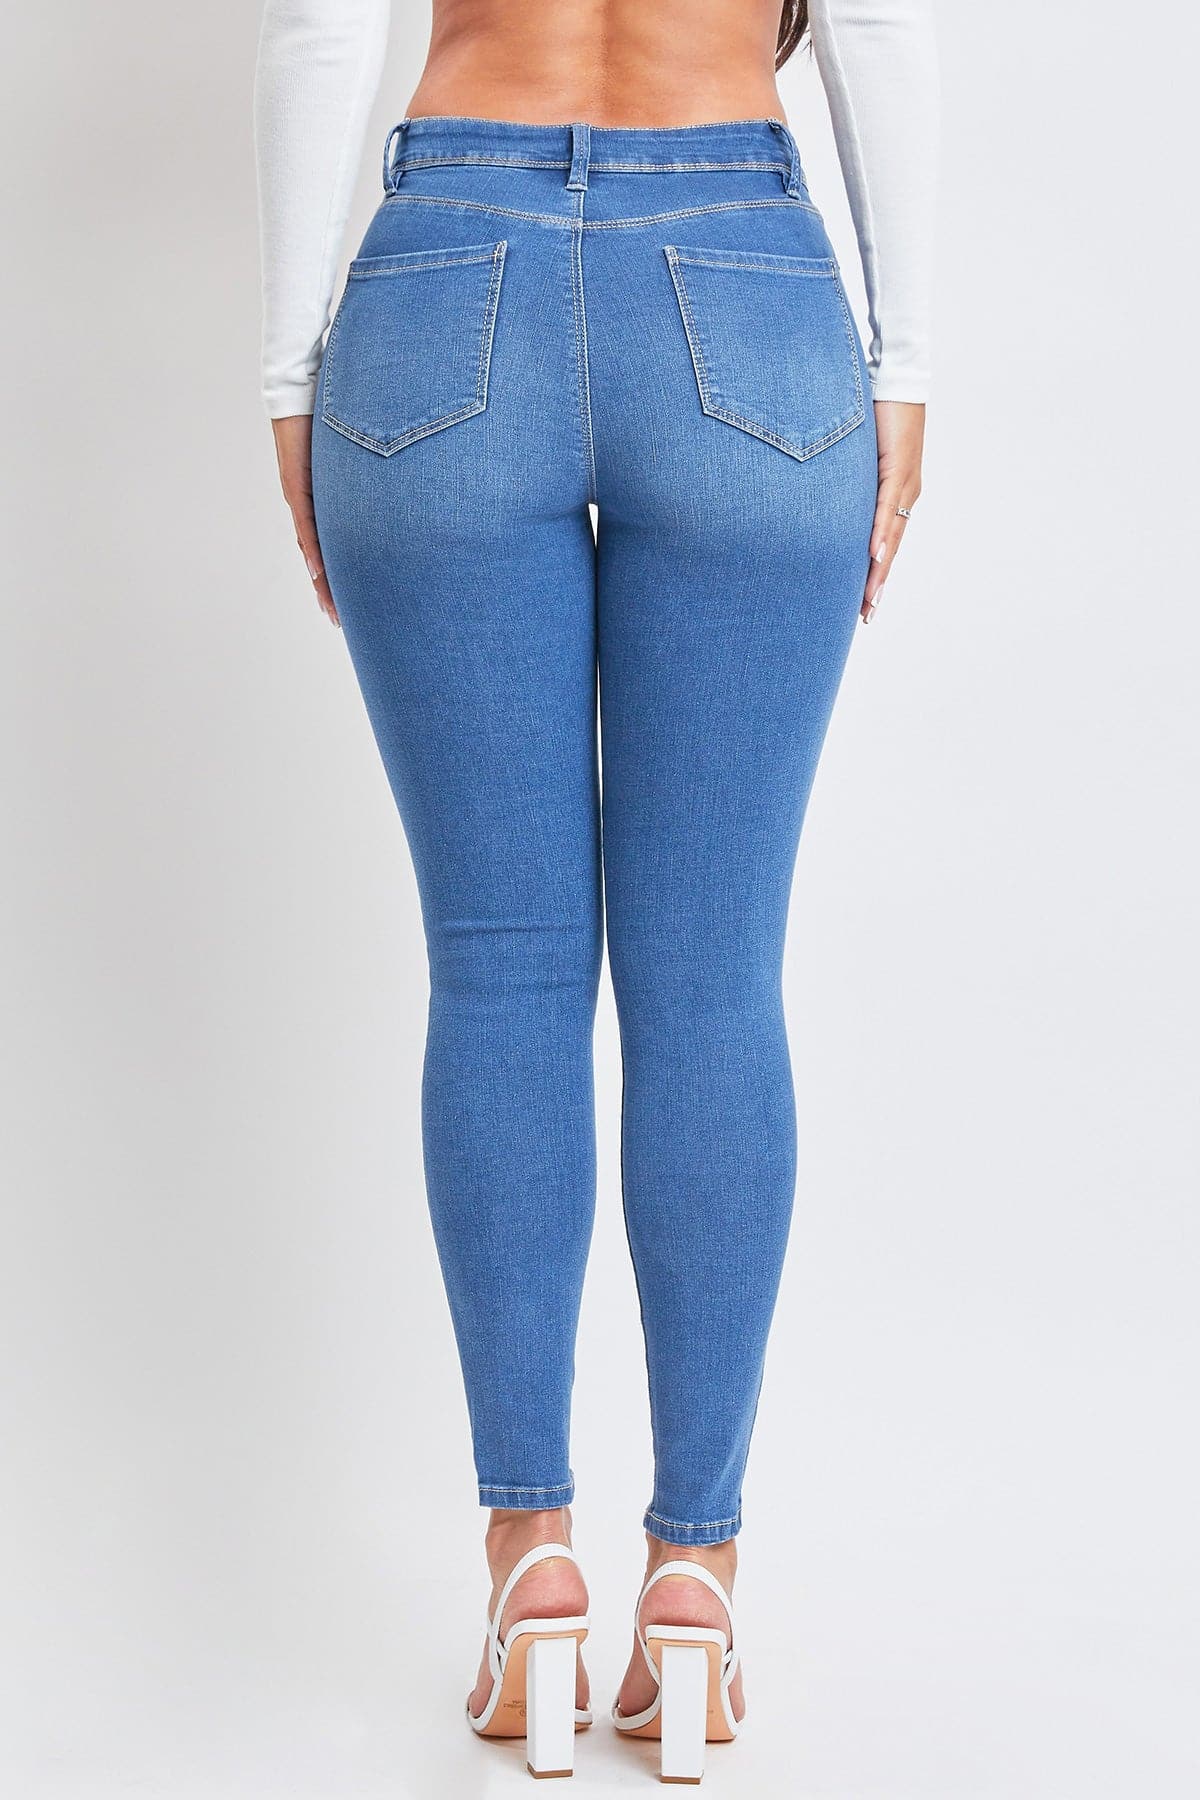 Women's Sustainable Essential  Skinny Jeans-Sale